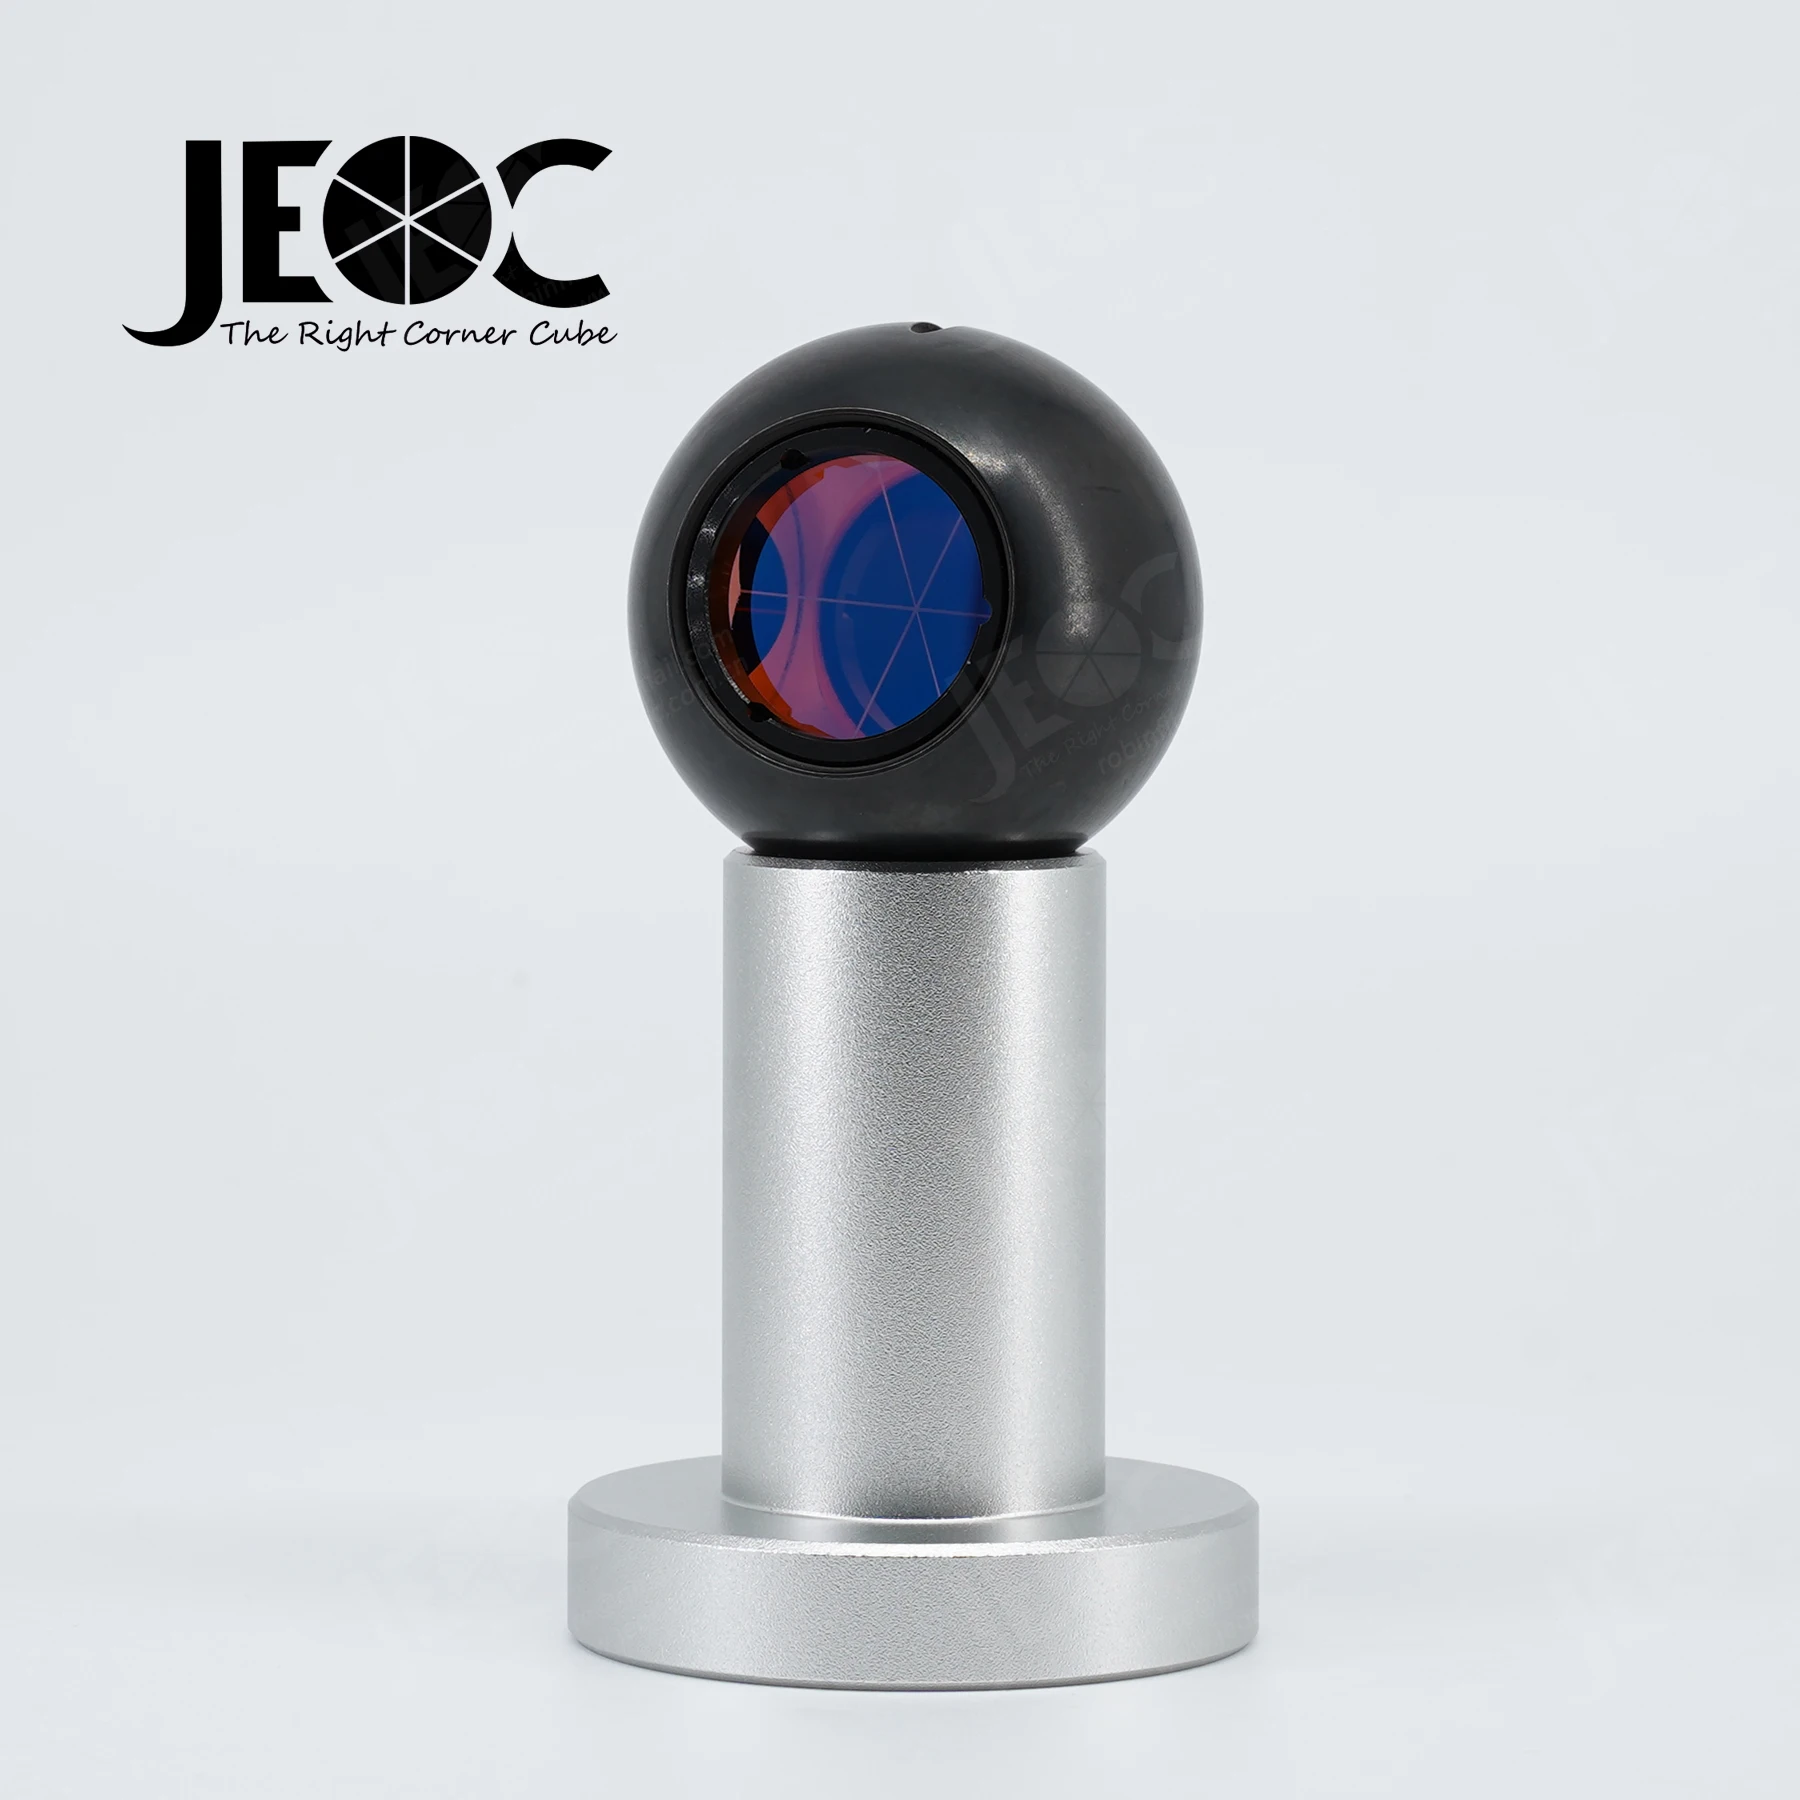 

JEOC Mini Spherical Monitoring Prism Set Reflector with Magnetic Pedestal Land Surveying Accessories Topography